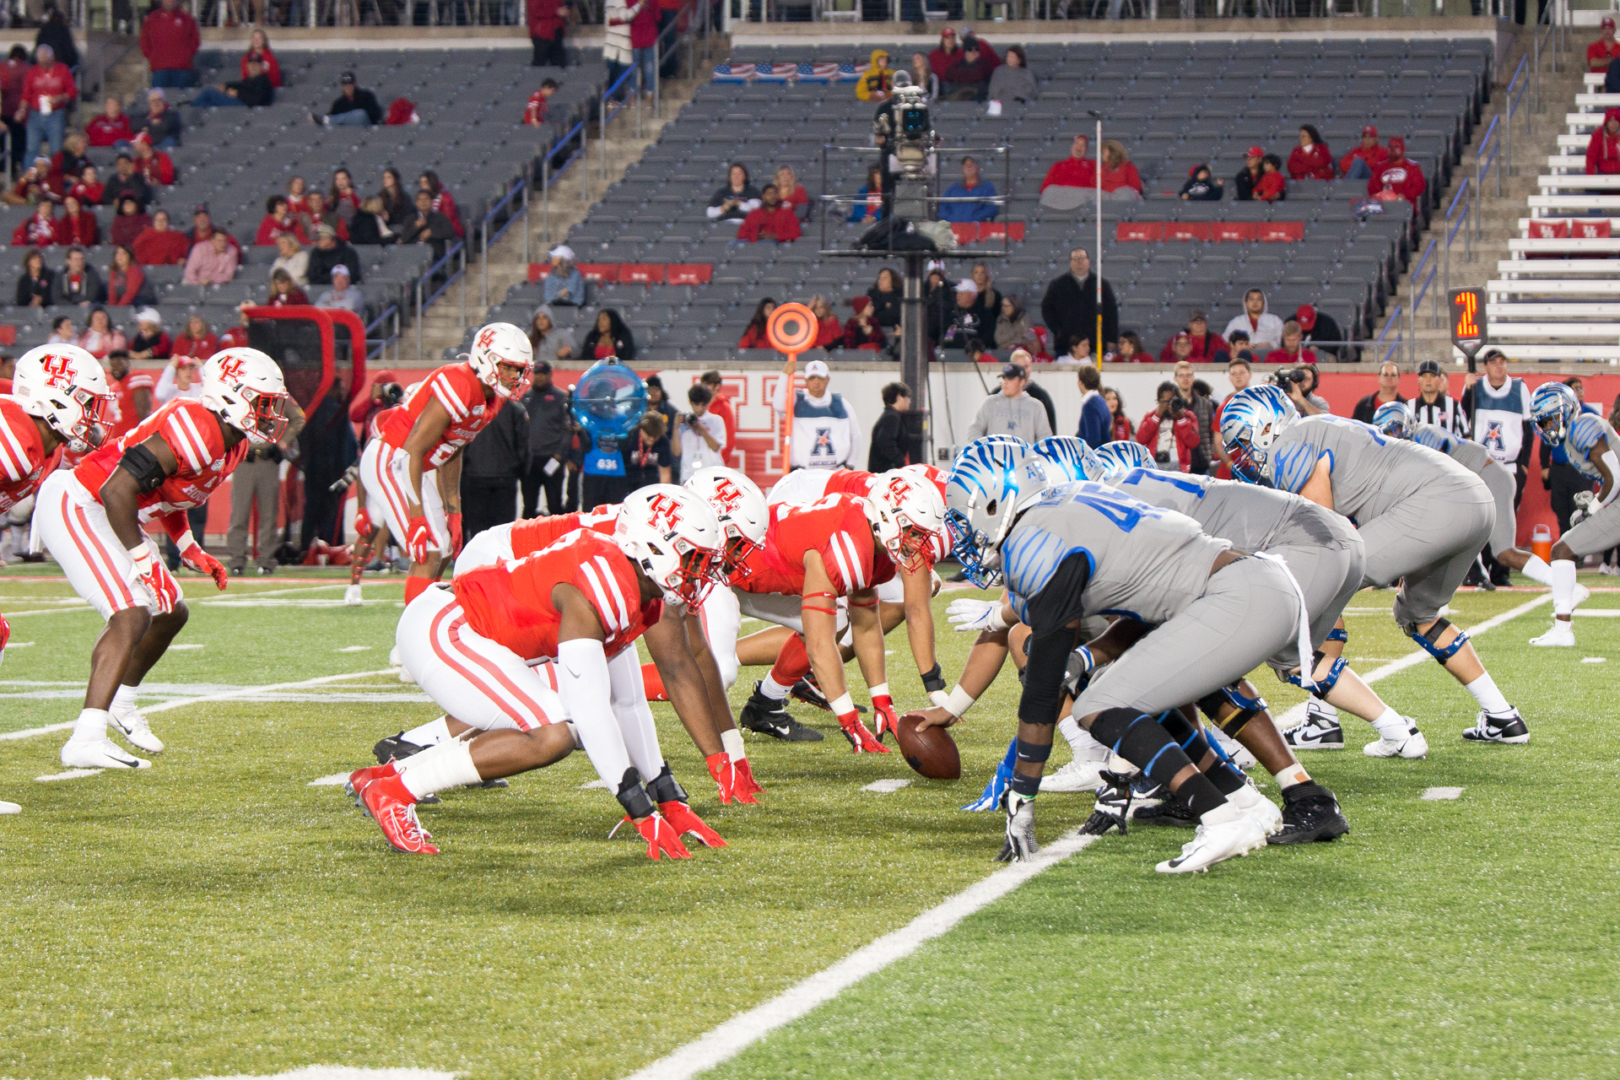 Houston's defensive line, shown facing off against Memphis on Nov. 16, held Tulsa to negative rushing yards in its Week 13 win over the Golden Hurricane and must again step up against No. 24 Navy's triple-option offense. | Katrina Martinez/The Cougar